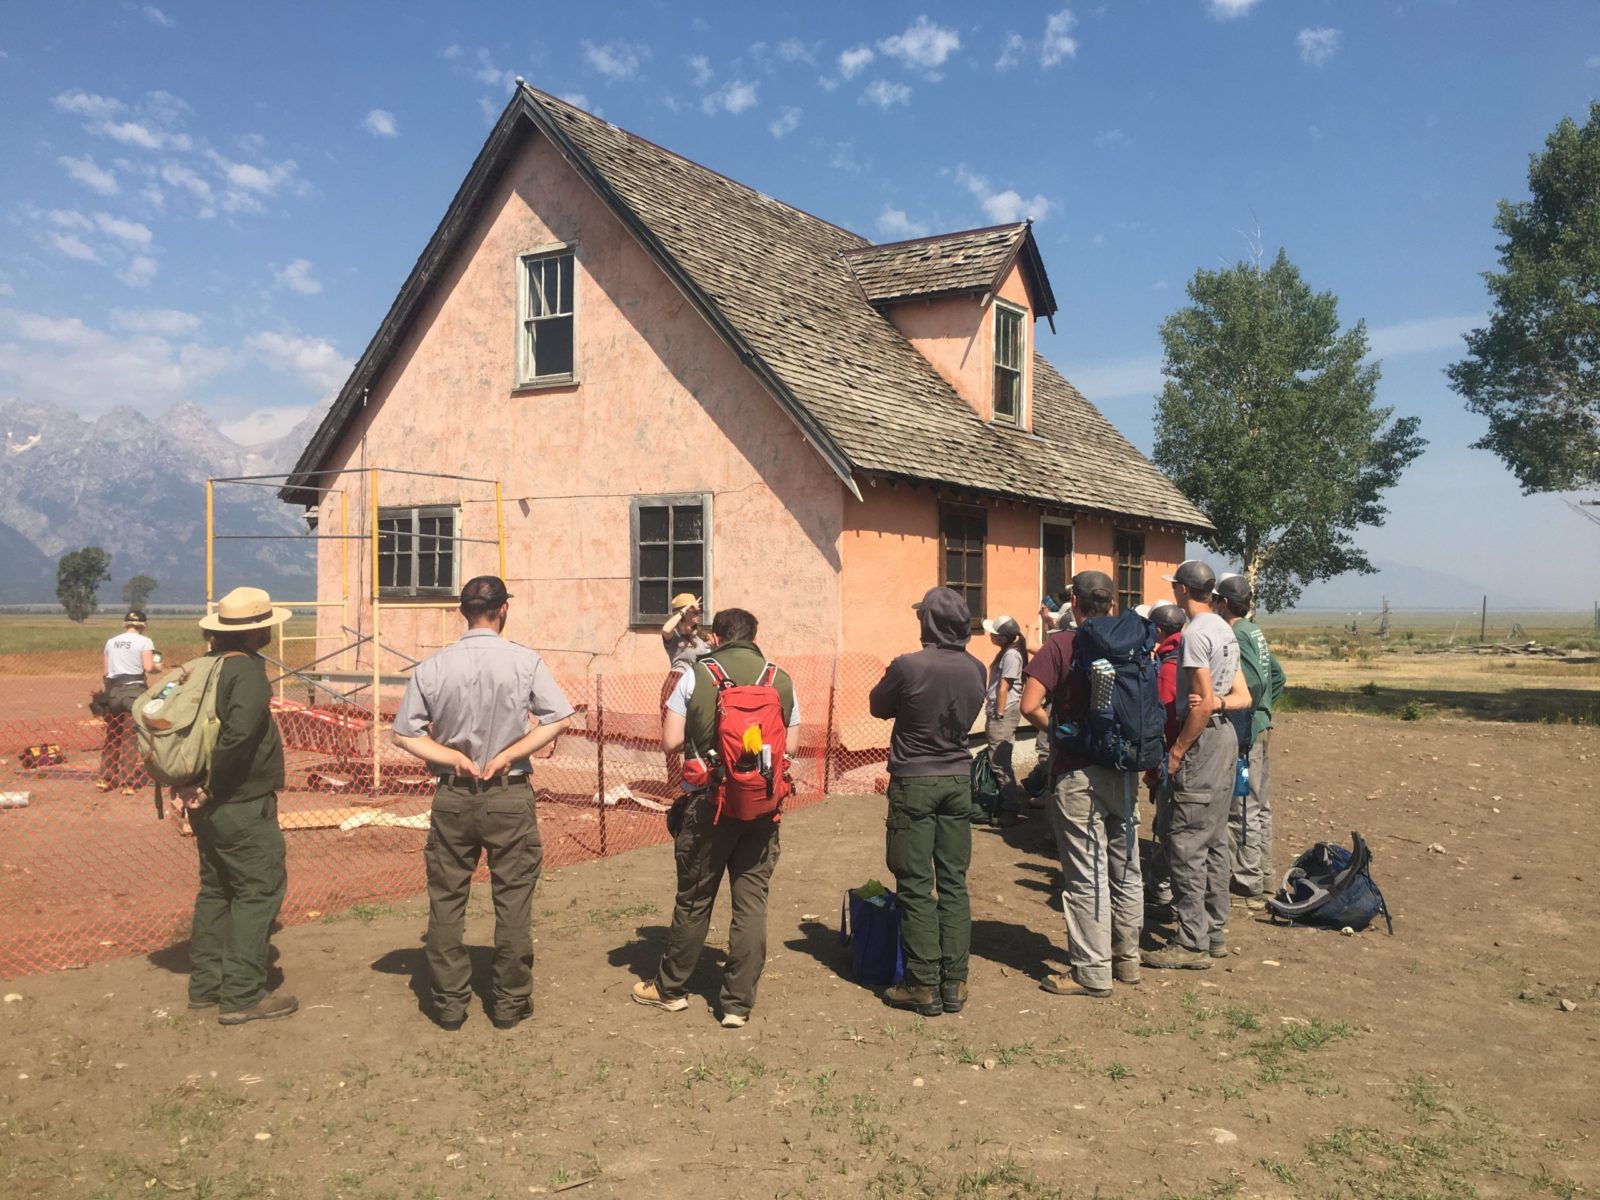 Learning about the importance of preserving the many historic structures in Grand Teton National Park.